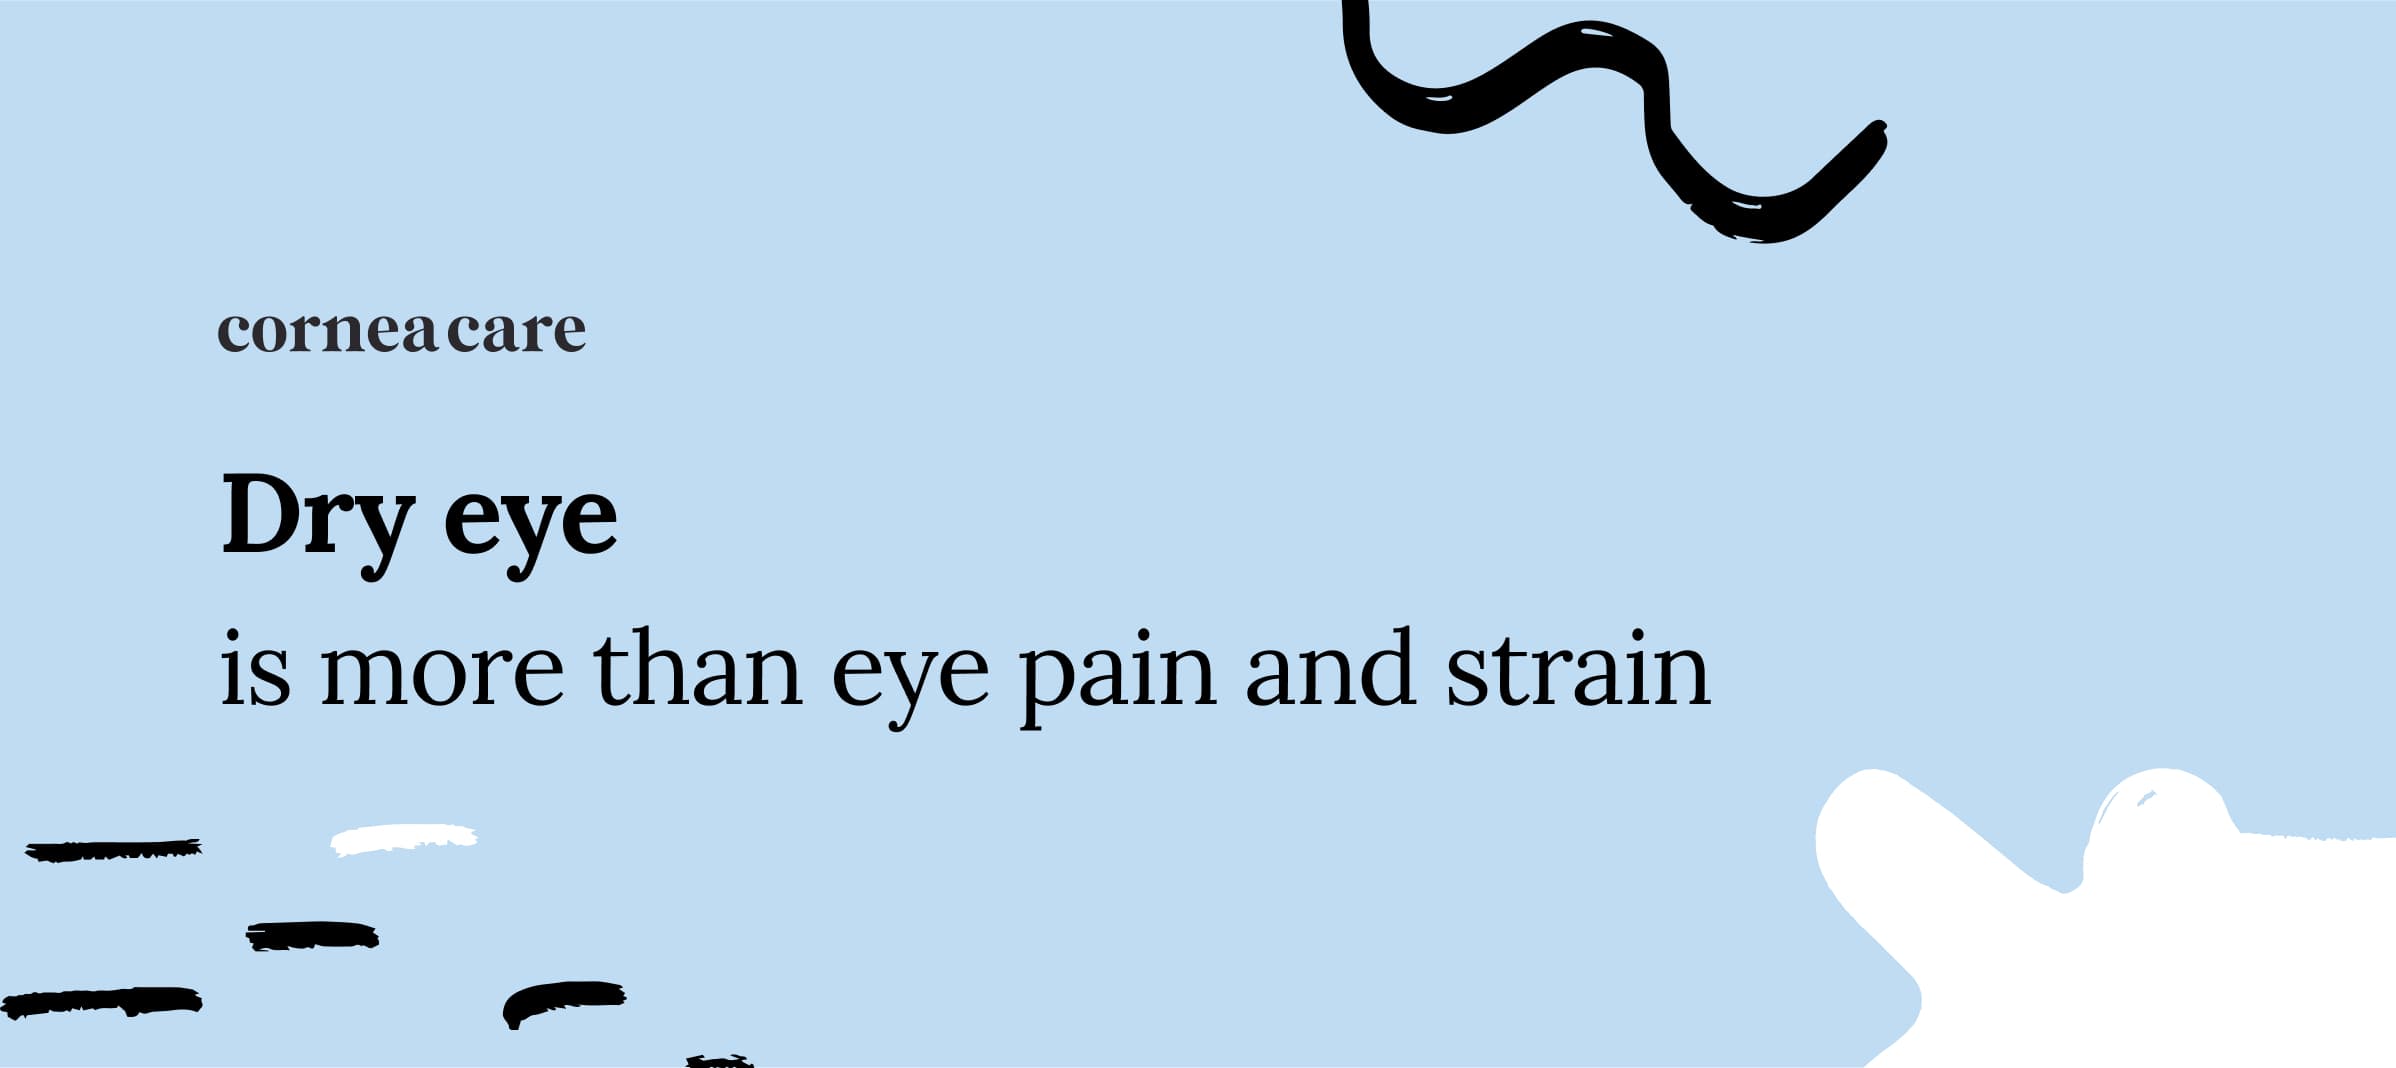 dry eye is more than eye pain and strain